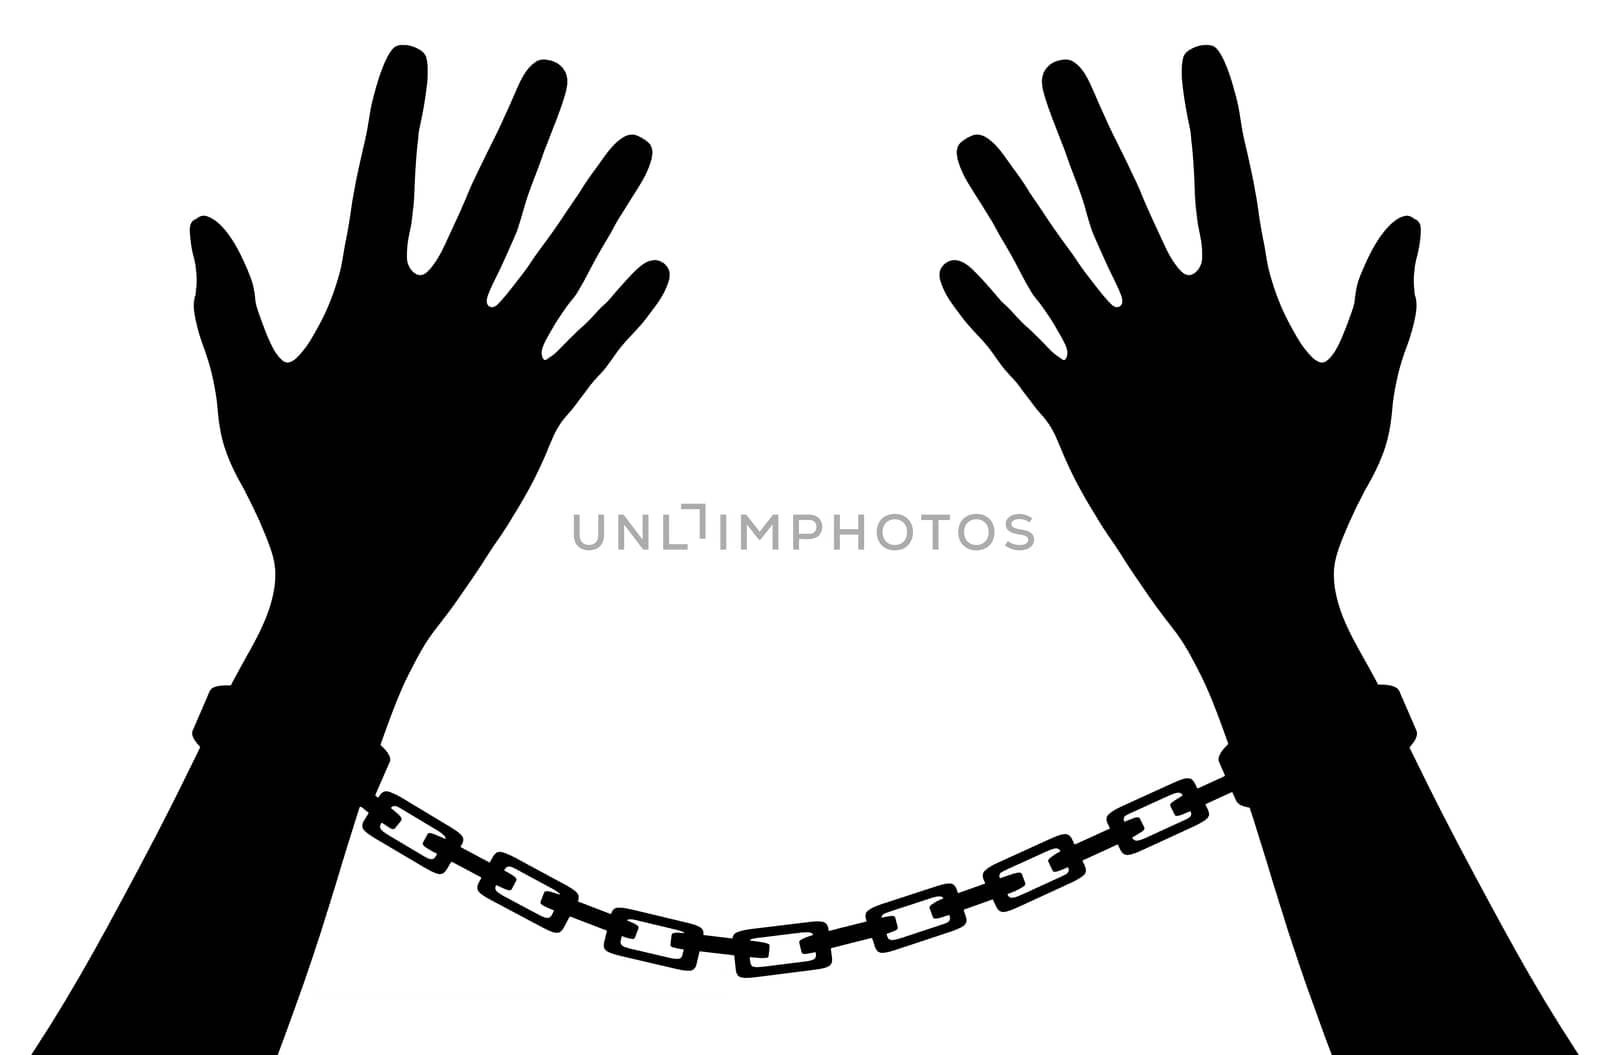 Illustration of hands chained together